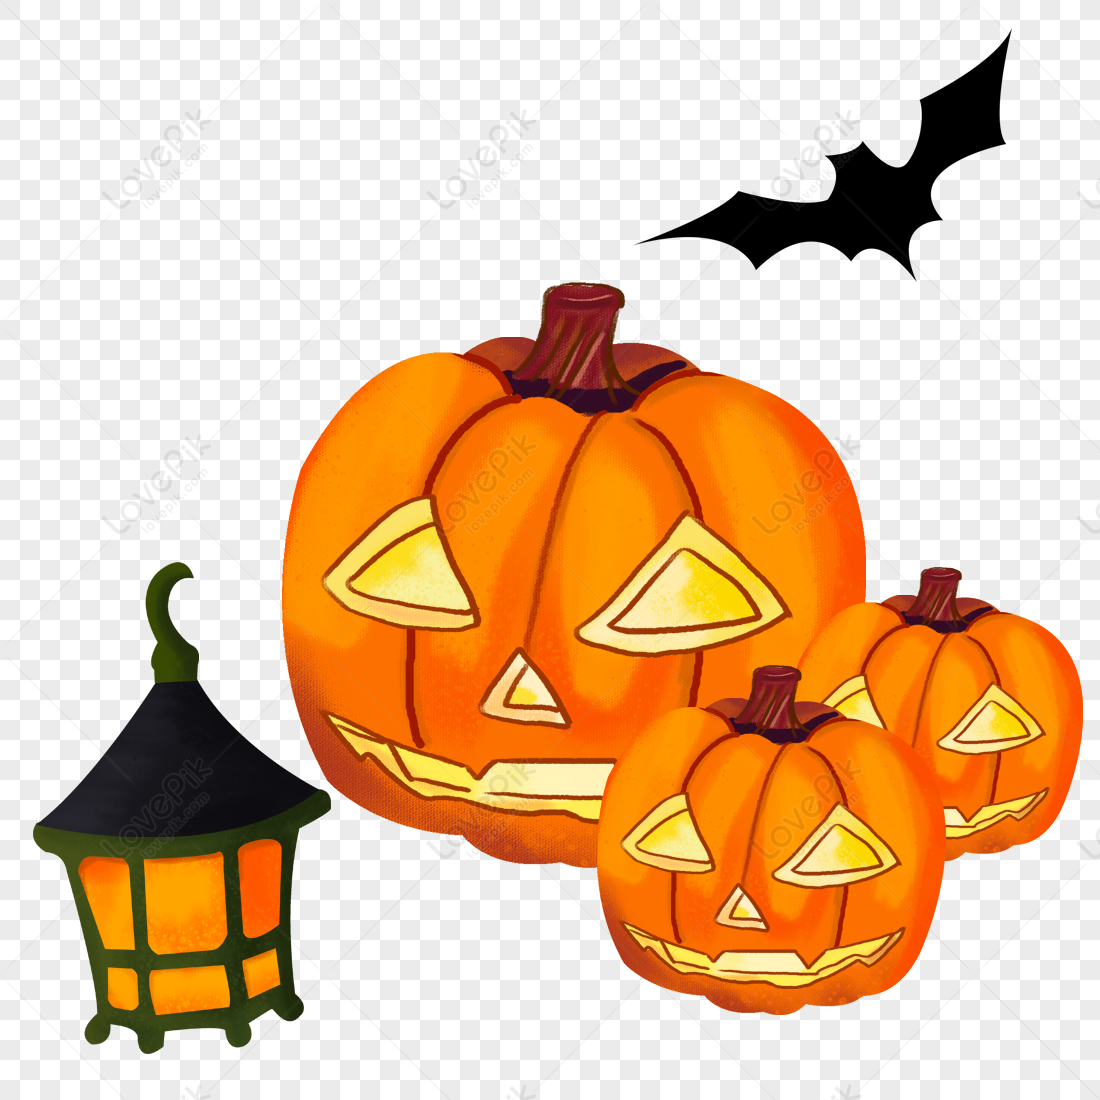 Halloween Pumpkin Free Button Element PNG Transparent Background And  Clipart Image For Free Download - Lovepik | 400797610